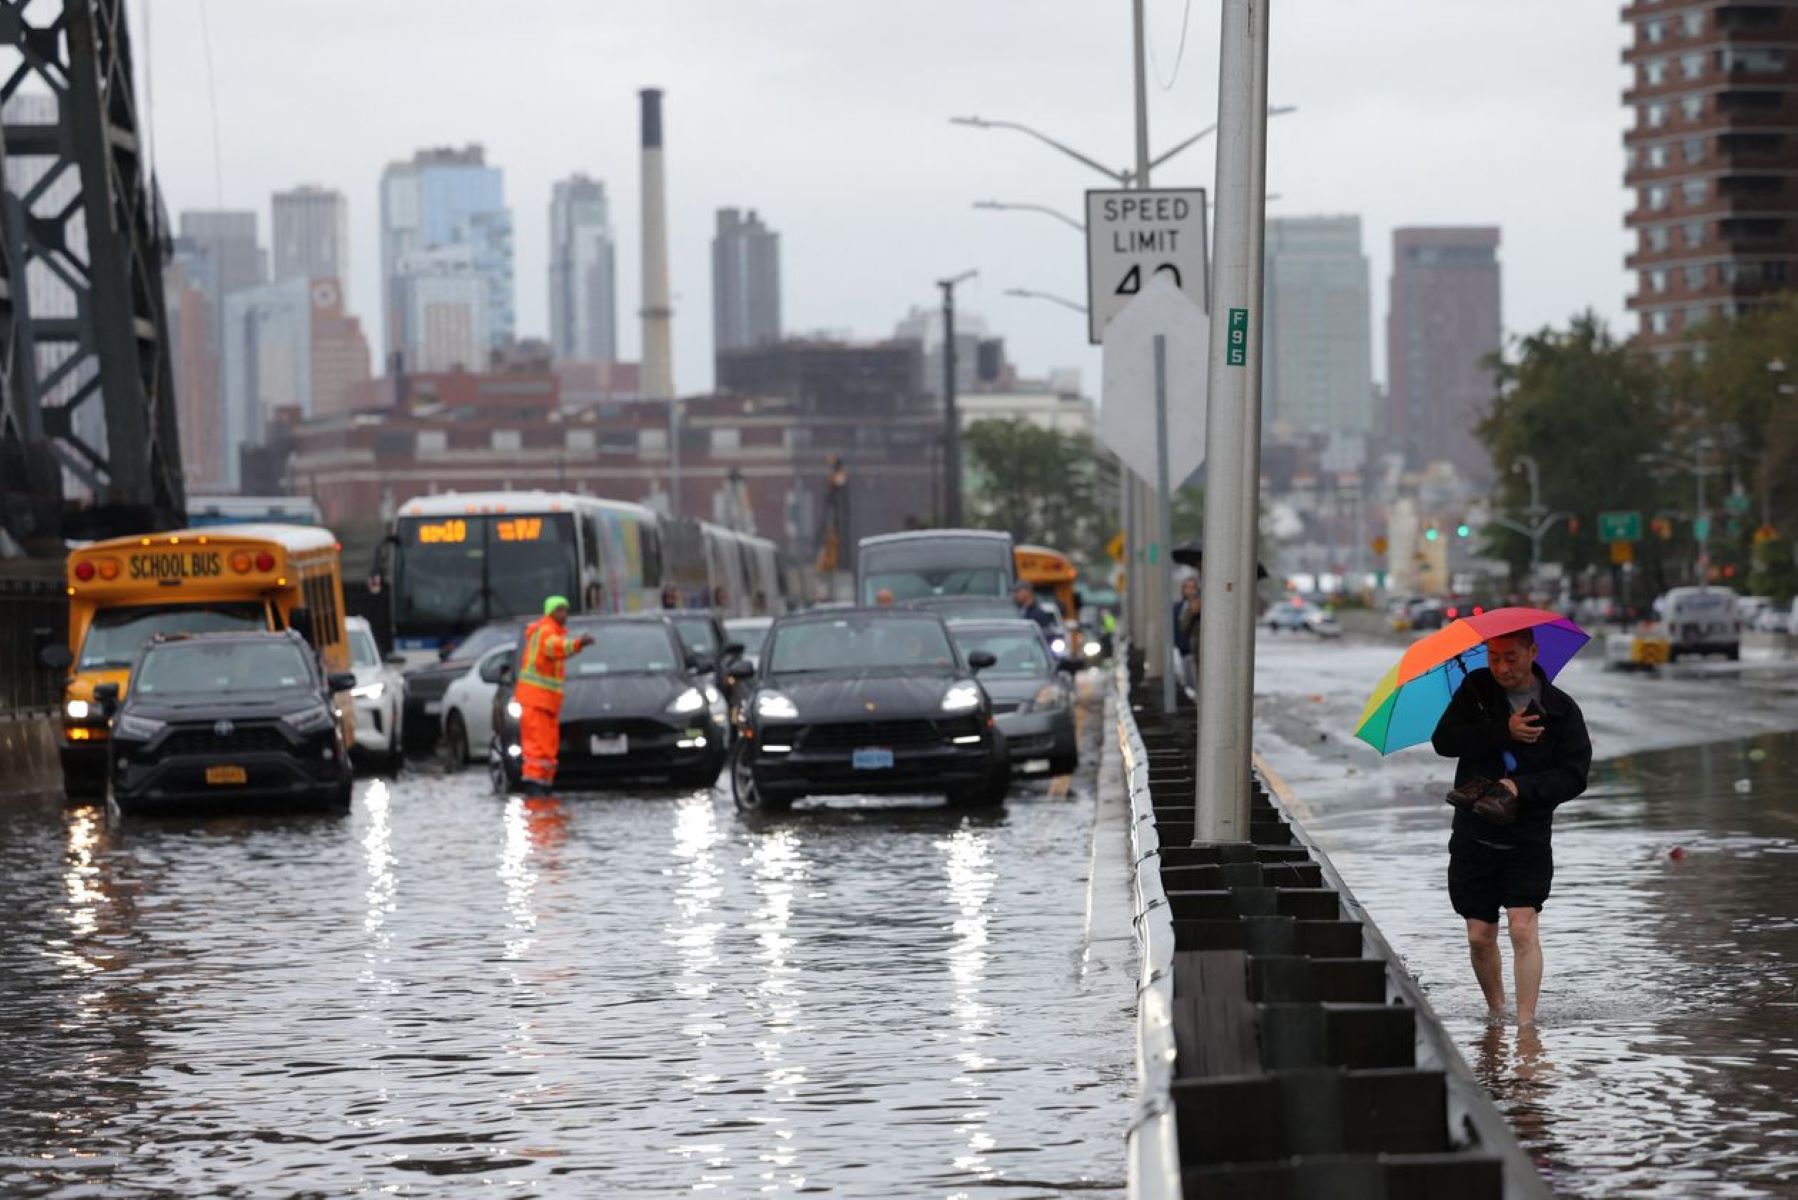 new-york-city-faces-severe-flooding-crisis-streets-turn-into-dangerous-waterways